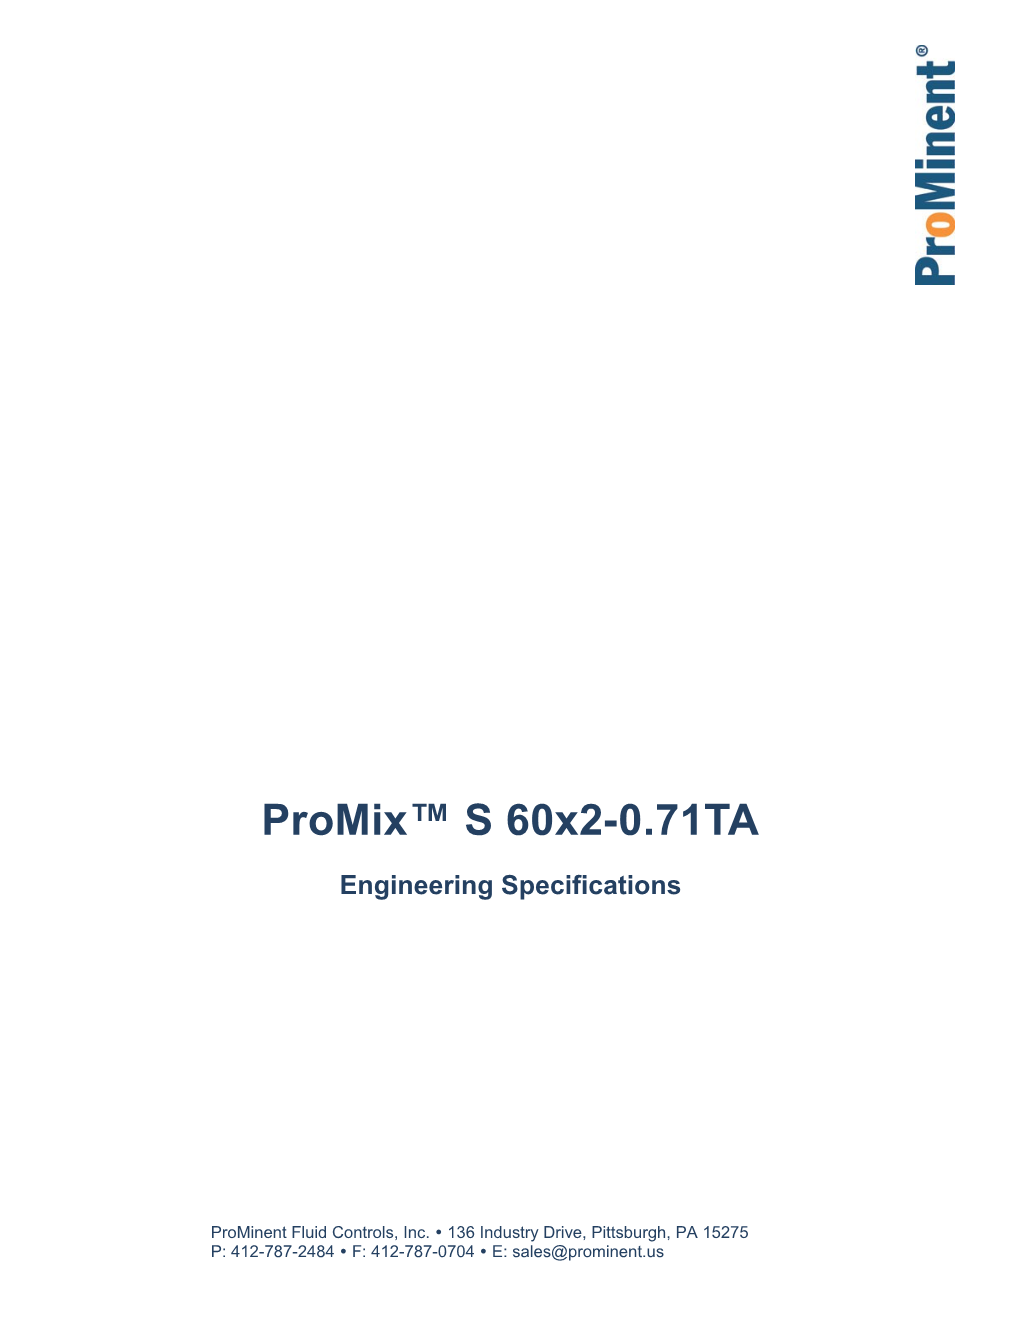 Prominent Promix Polymer Blending System Specifications